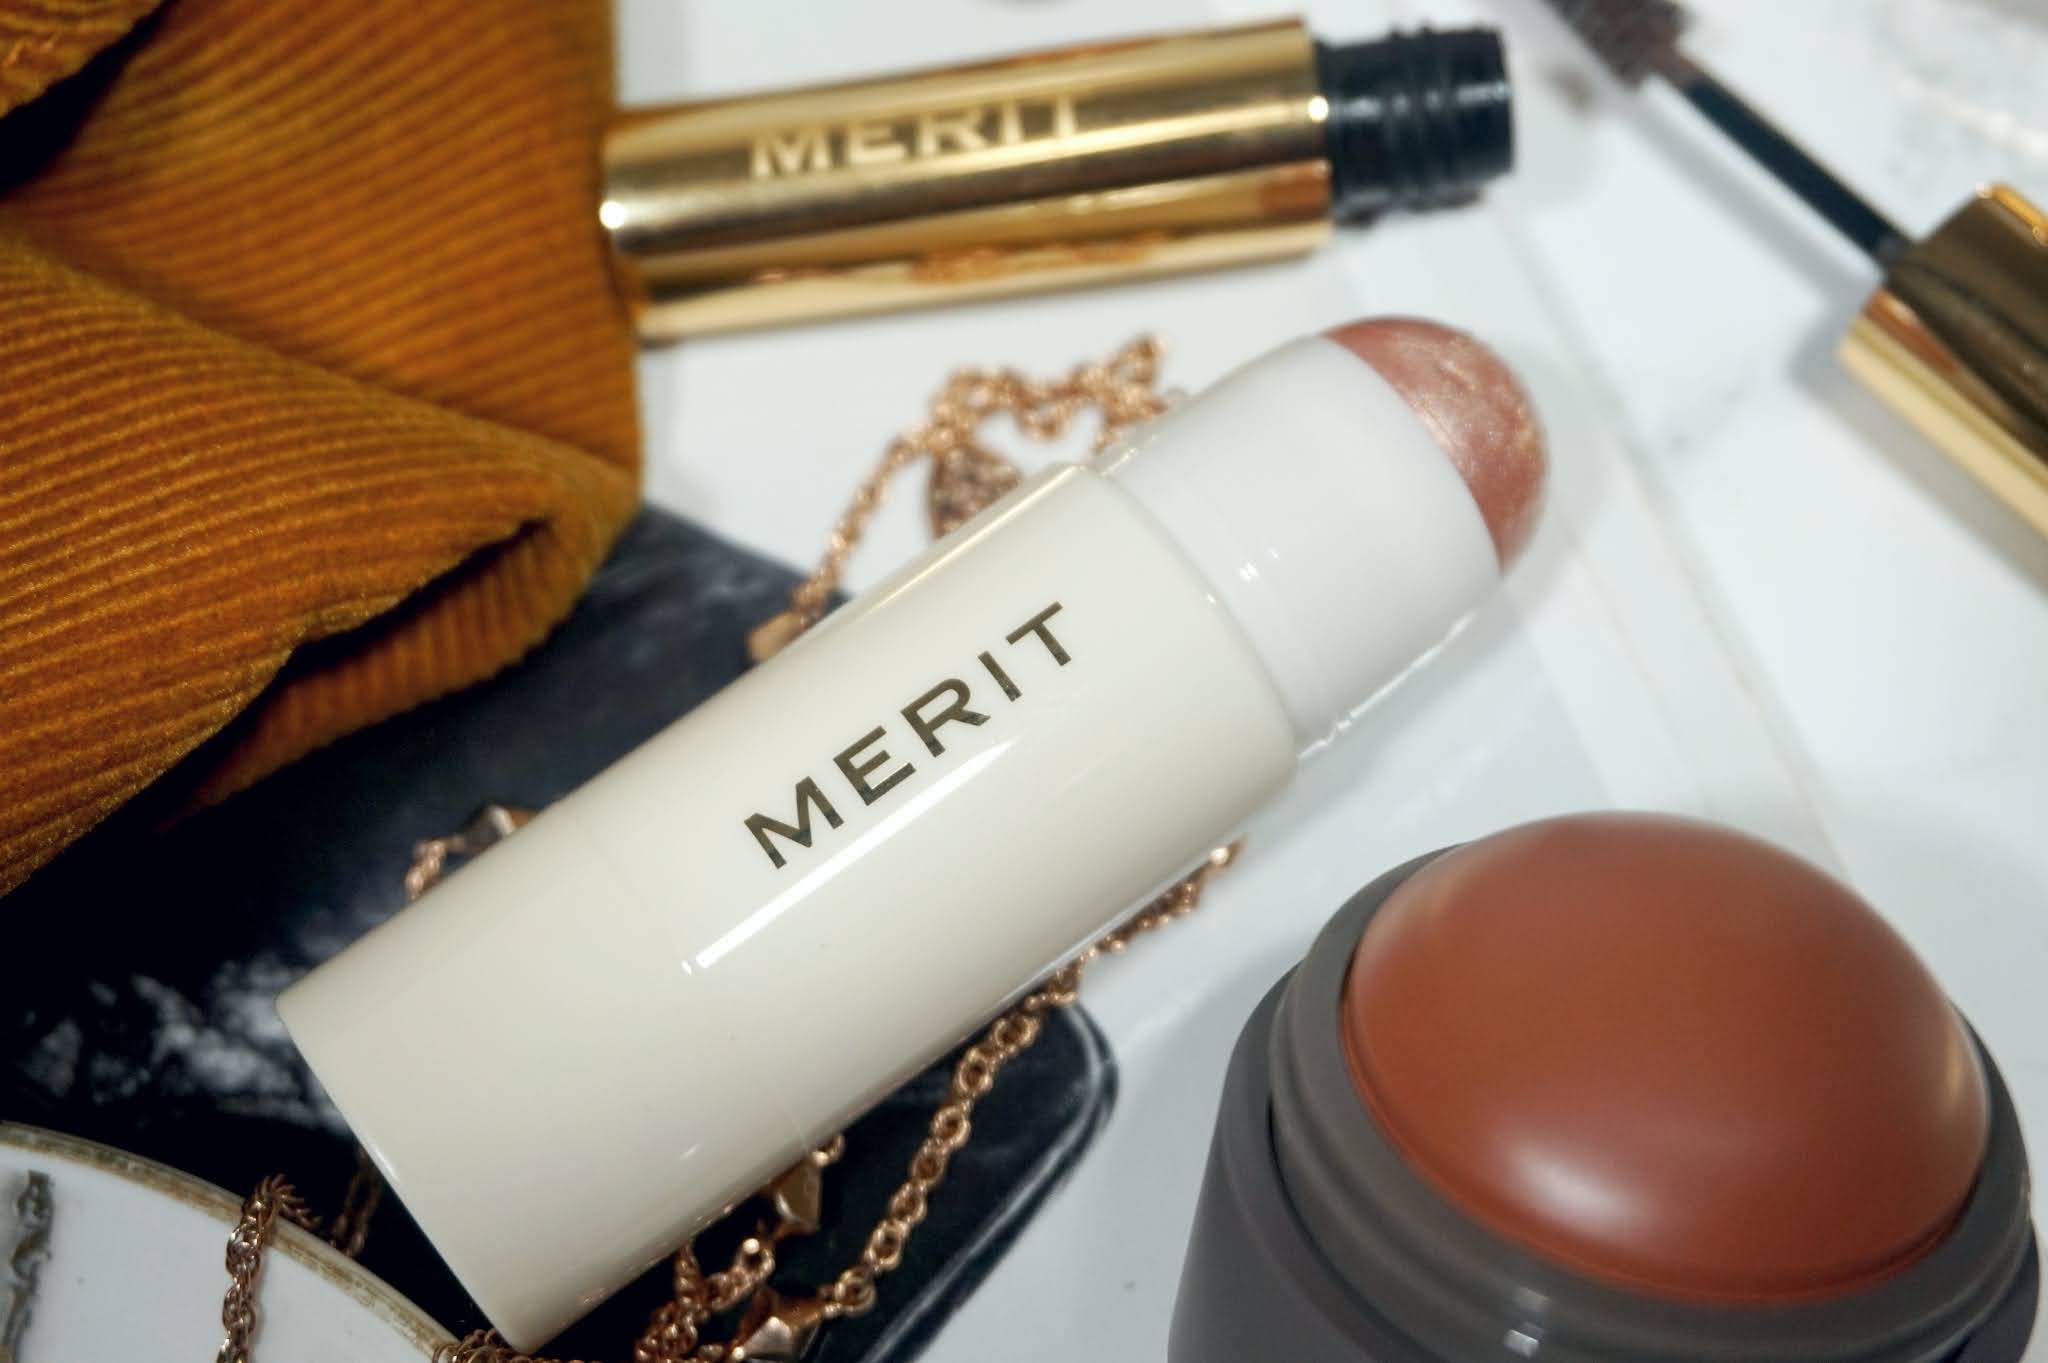 MERIT Beauty - Full Brand Review and Swatches